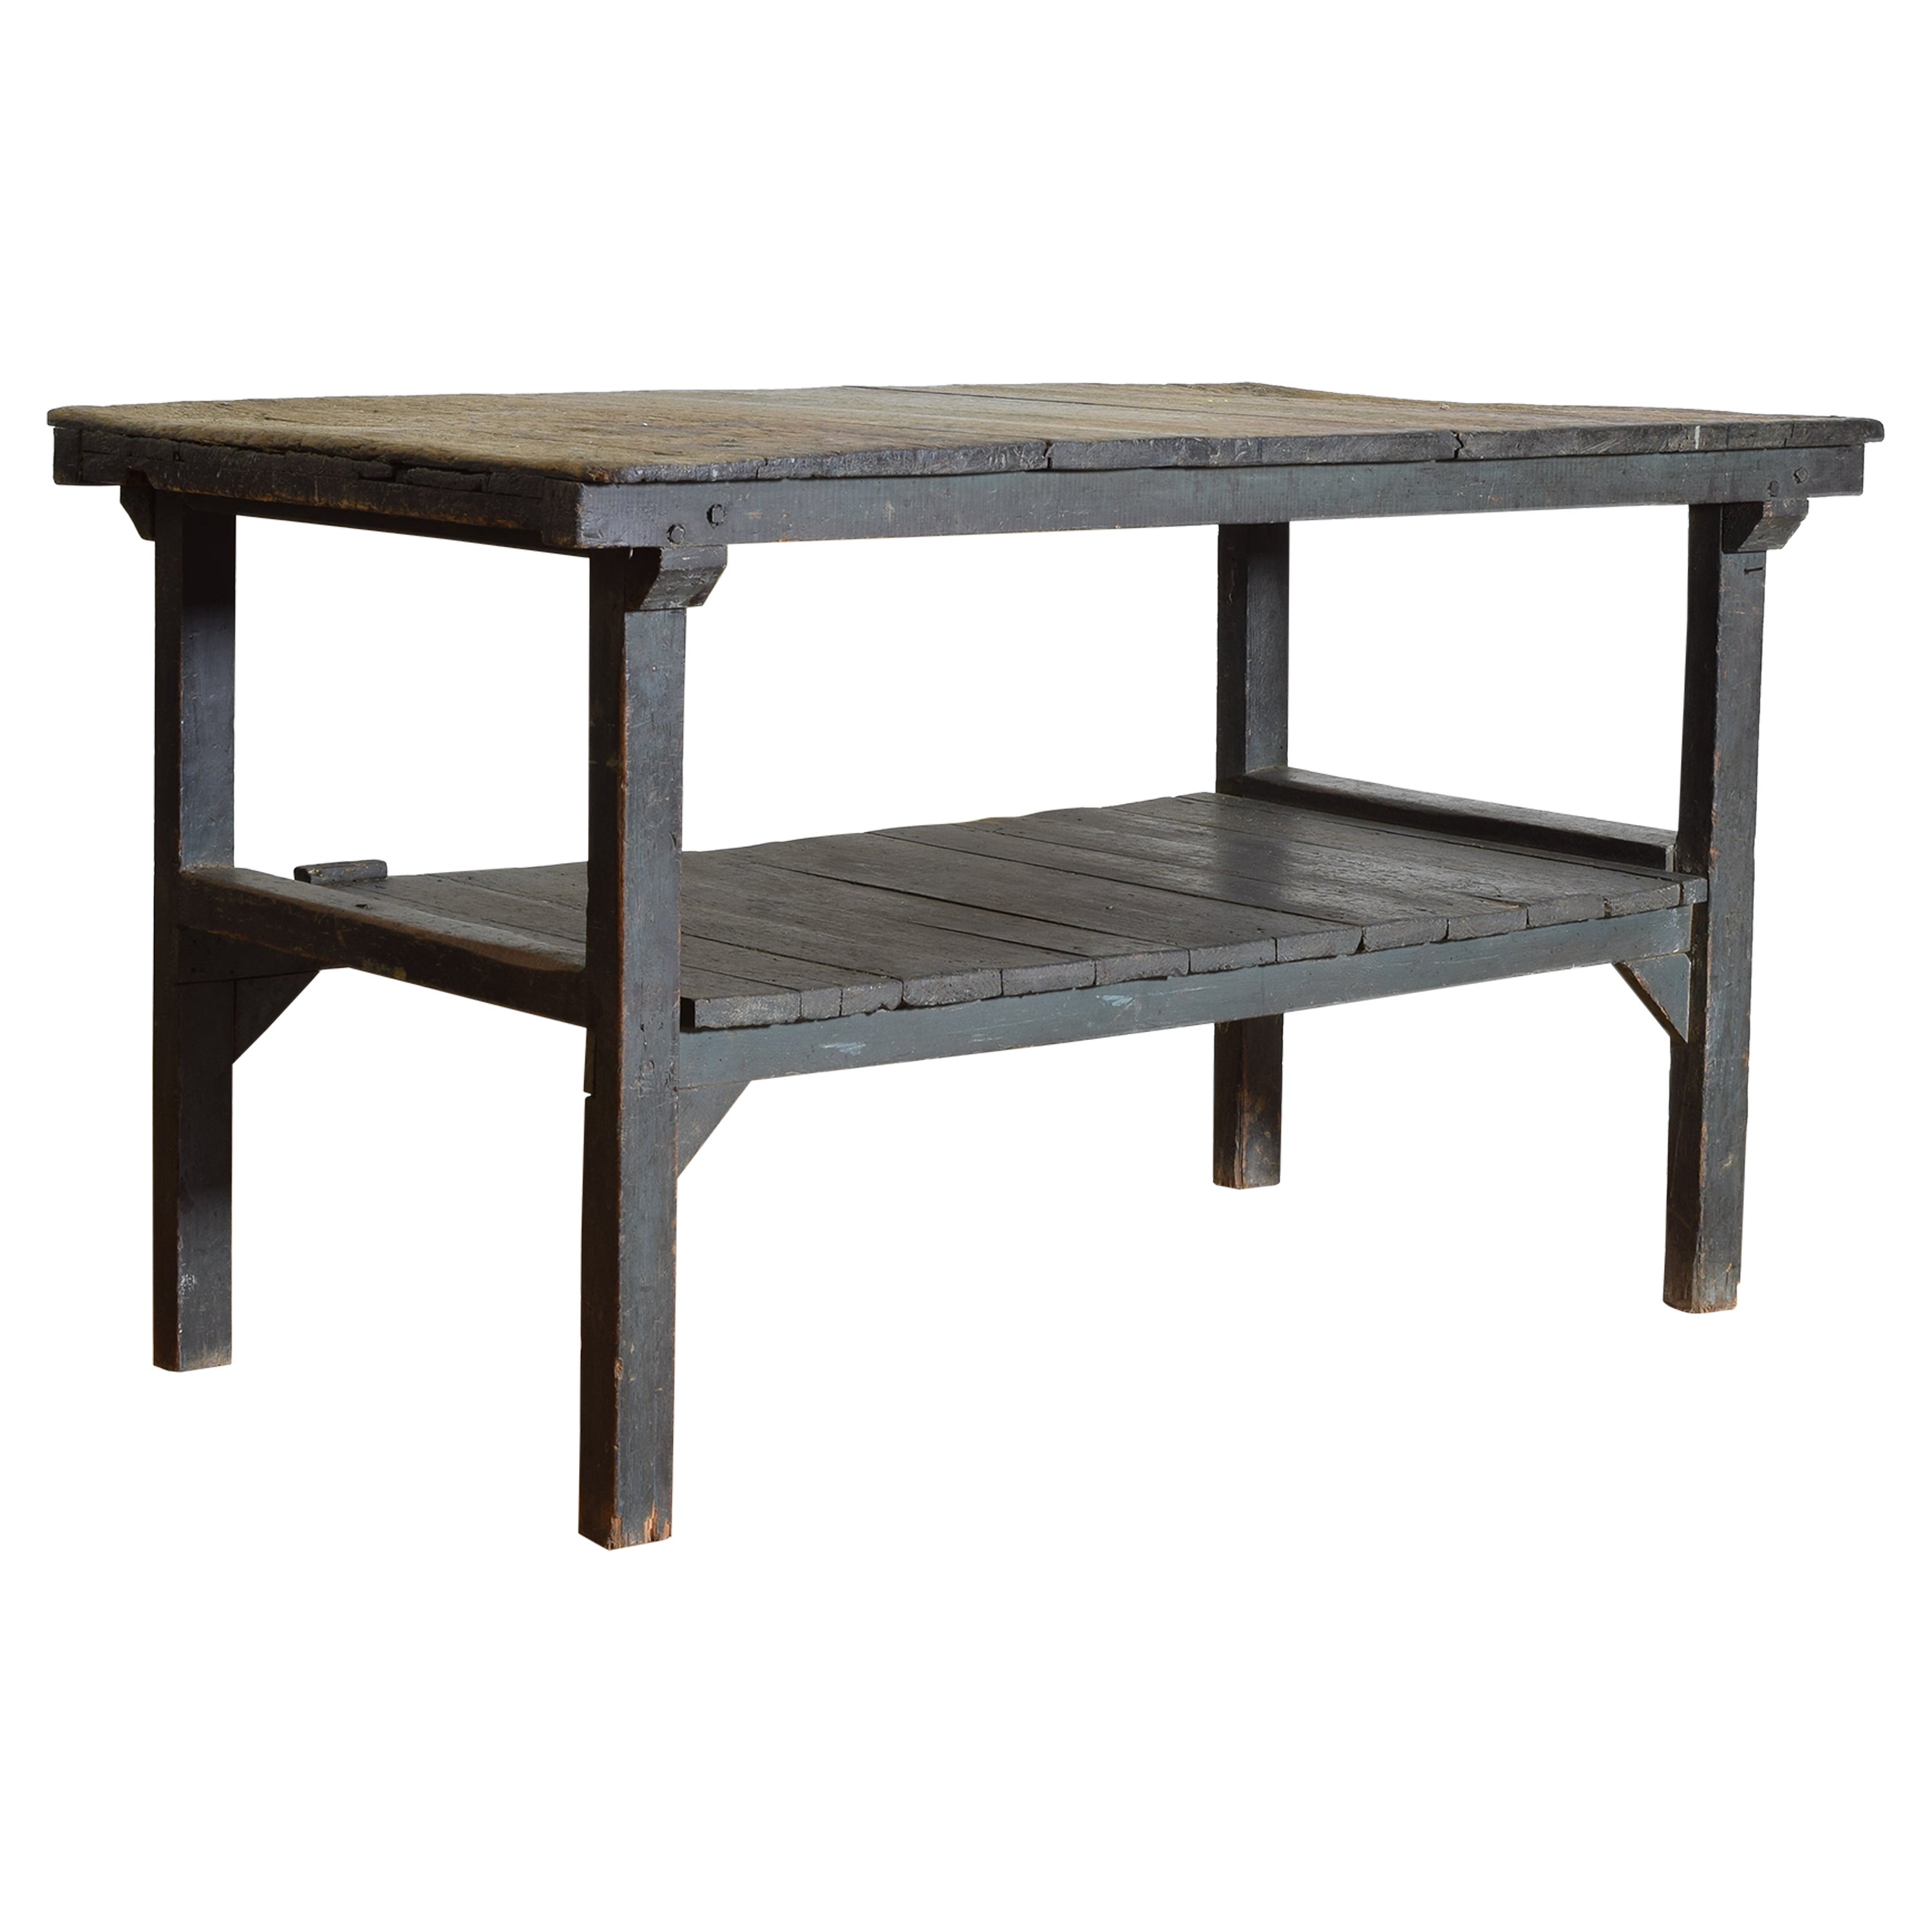 Spanish Neoclassic Blue Painted Pinewood Gardening Table, 1st quarter 19th cen. For Sale